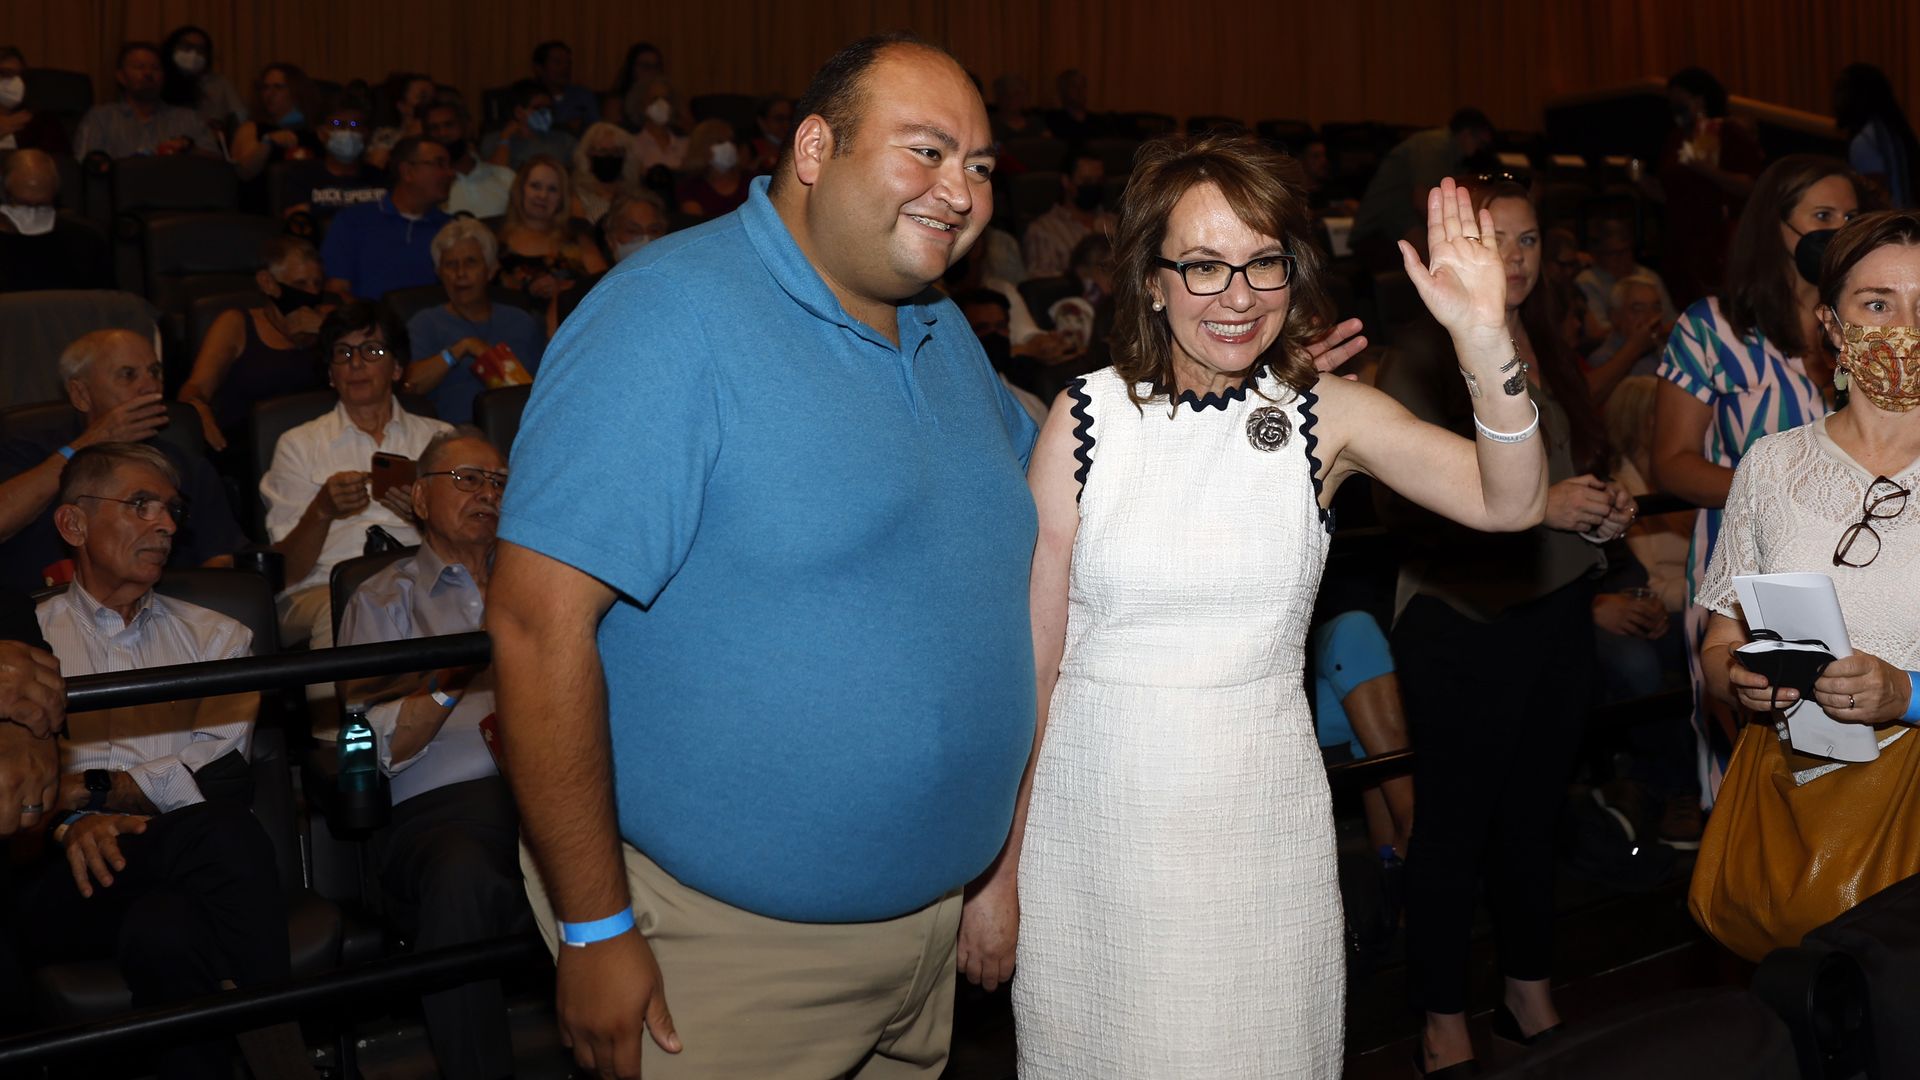 Former U.S. Rep. Gabrielle Giffords poses for a photo with her former intern Daniel Hernandez during the Tucson Premiere Screening Event of “Gabby Giffords Won’t Back Down.”